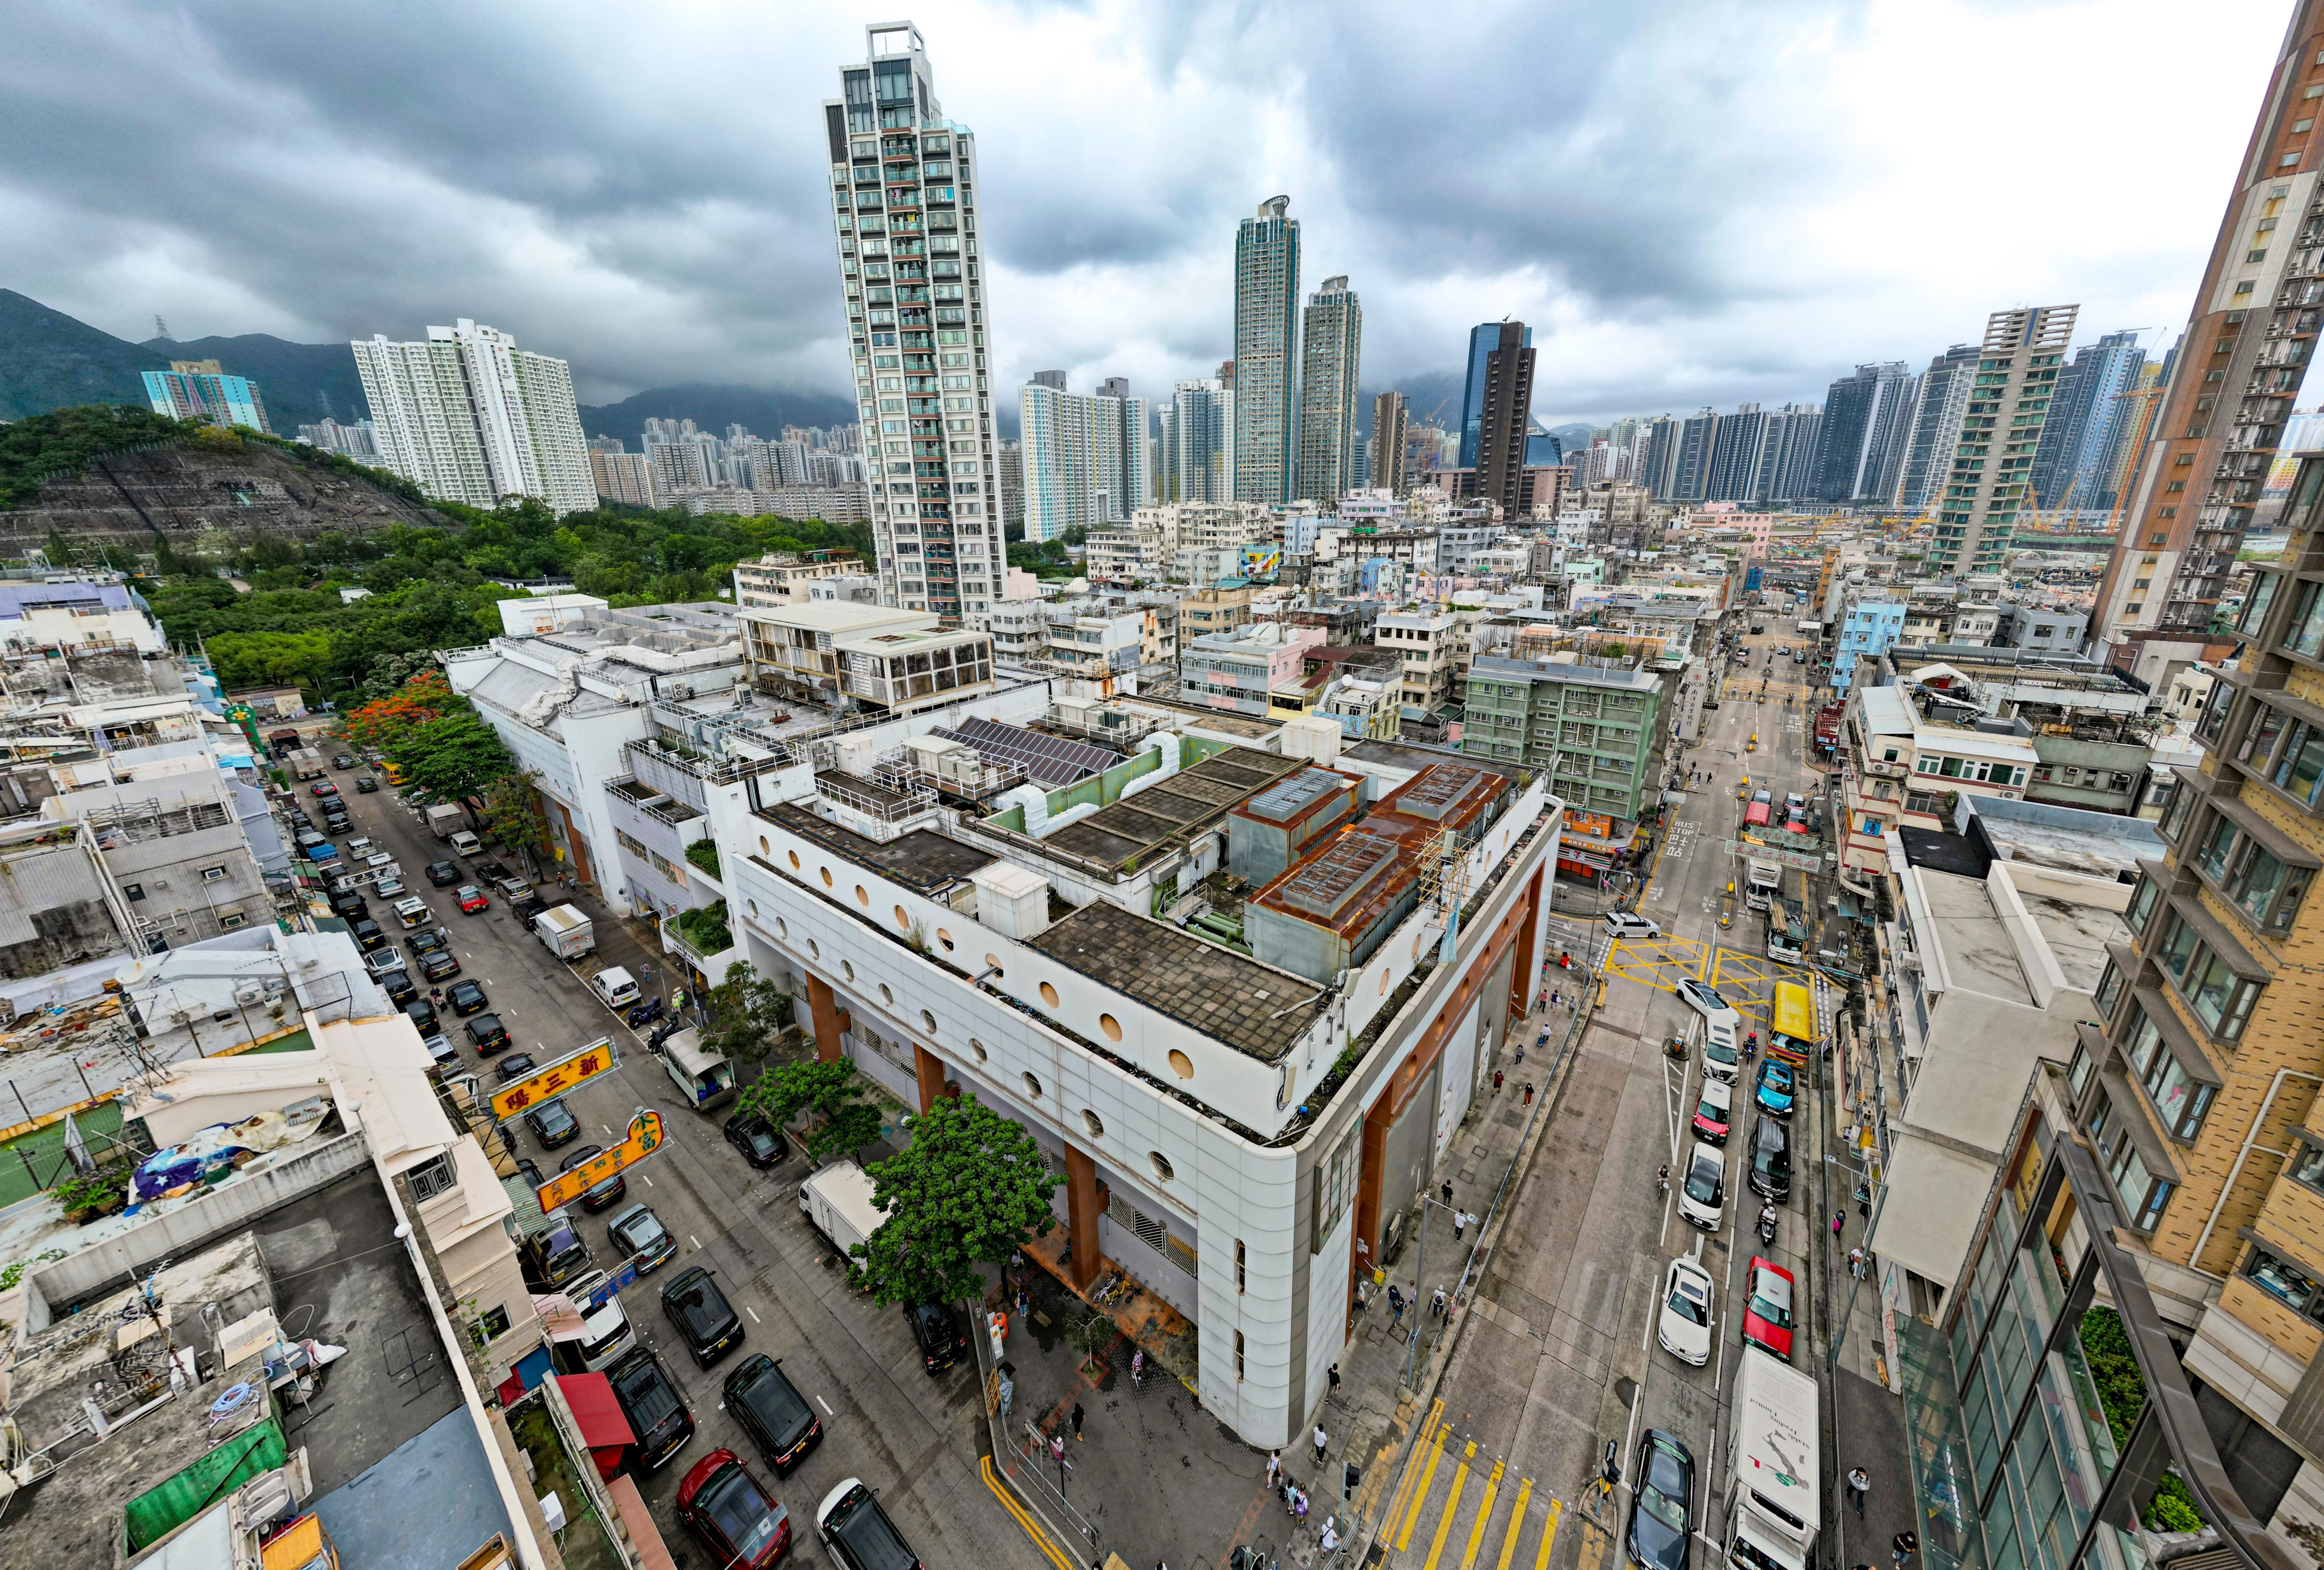 Part of the area affected by the Urban Renewal Authority’s plans to redevelop Kai Tak Road-Sa Po Road in Kowloon City. Photo: Yik Yeung-man